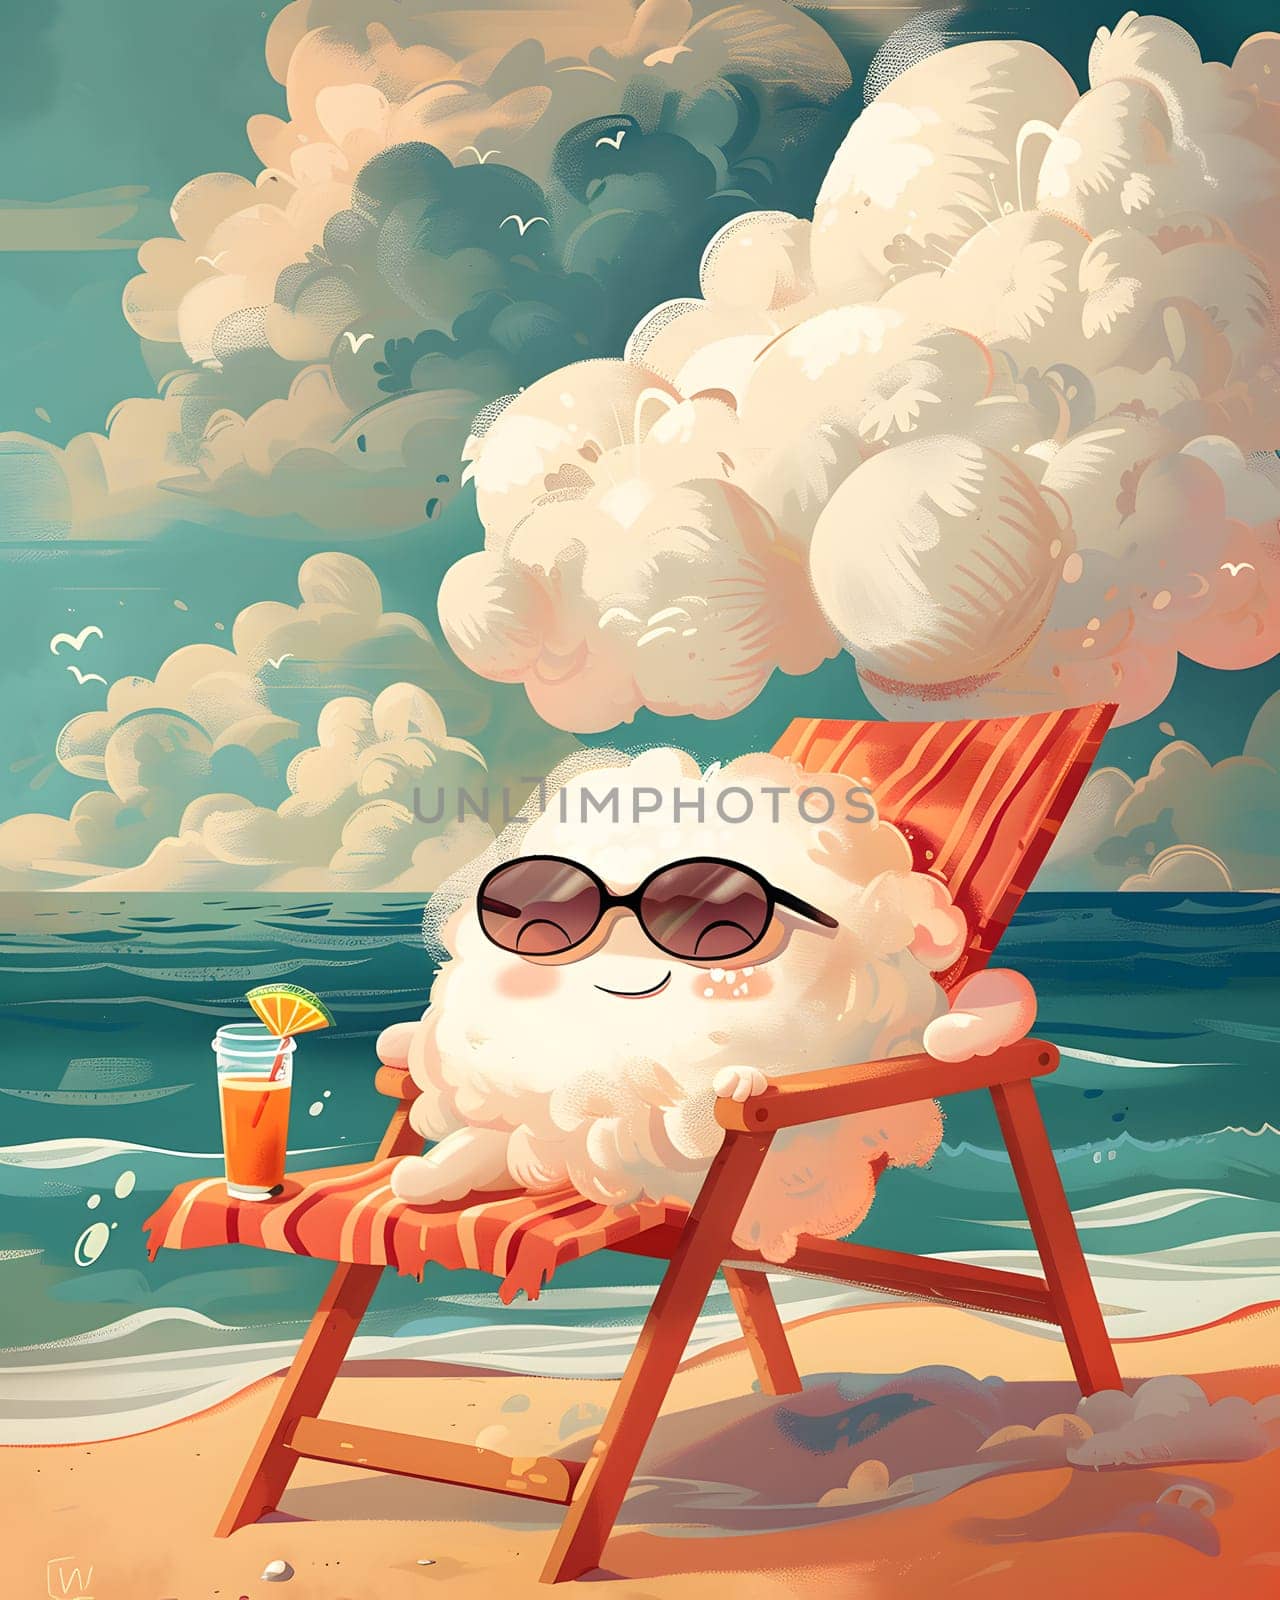 A cloud is lounging on a beach chair wearing sunglasses, it looks happy and relaxed. The sky is the canvas, natures art painting a serene scene